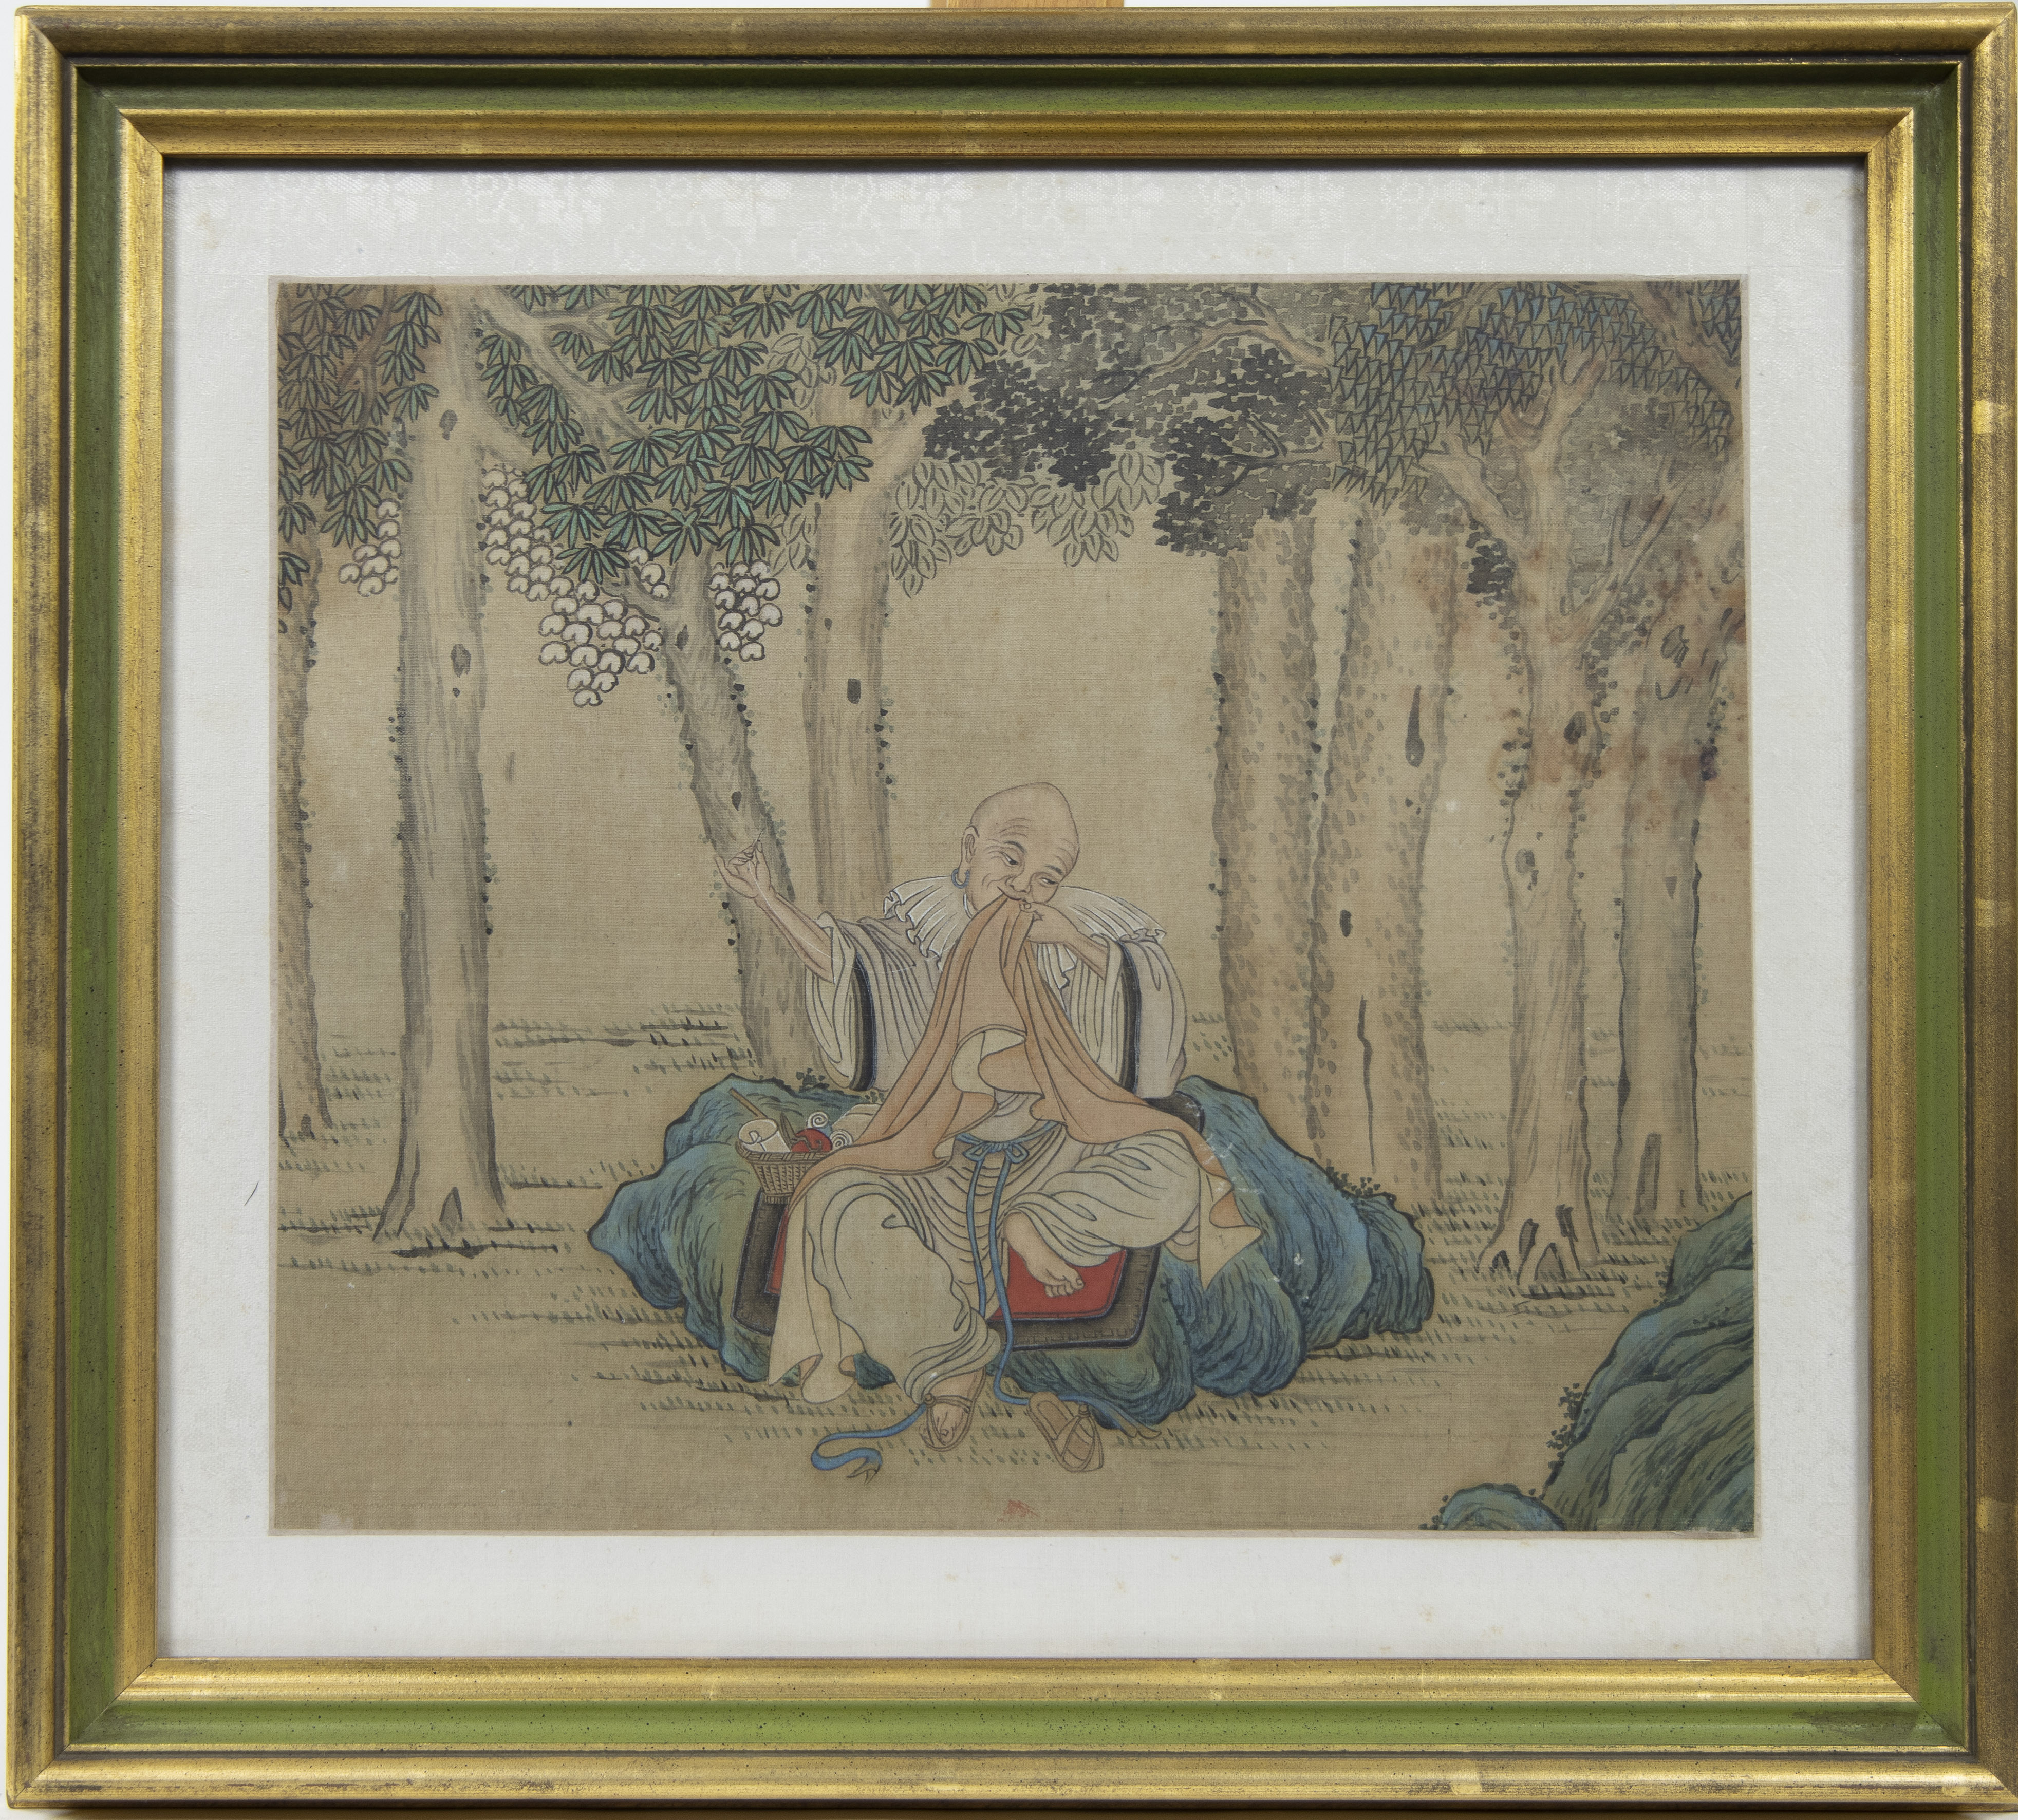 Set of 13 Chinese coloured drawings on silk, 19th century, some are signed - Image 15 of 17